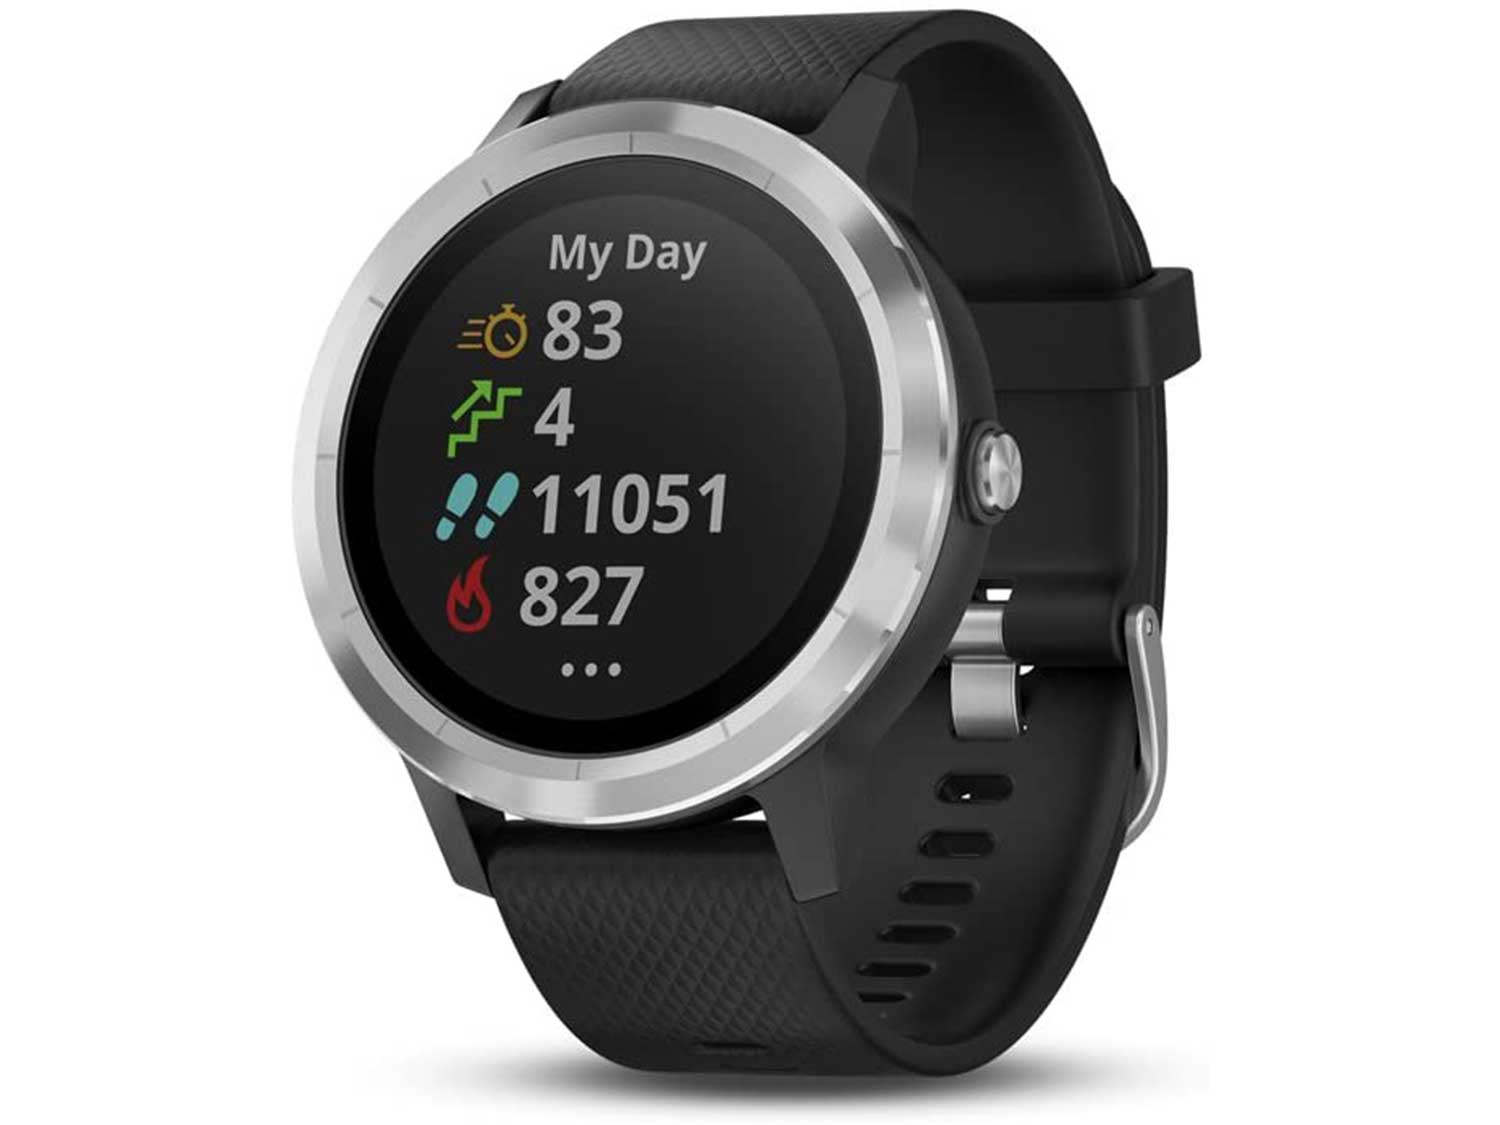 Garmin Vivoactive 3, GPS Smartwatch with Contactless Payments and Built-In Sports Apps, Black with Silver Hardware